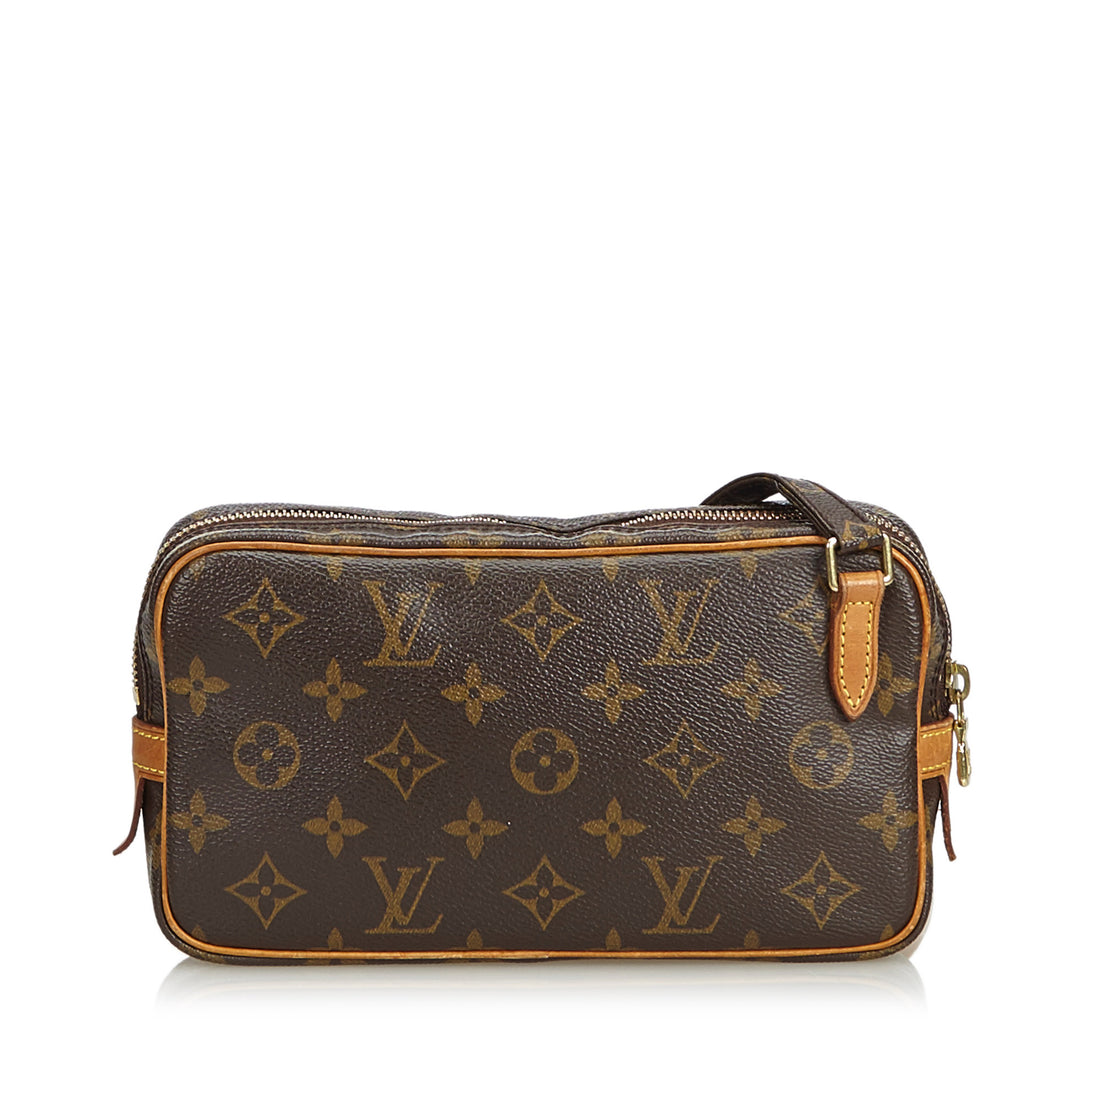 Louis vuitton Vintage 2004 Marly Bandouliere Crossbody Bag